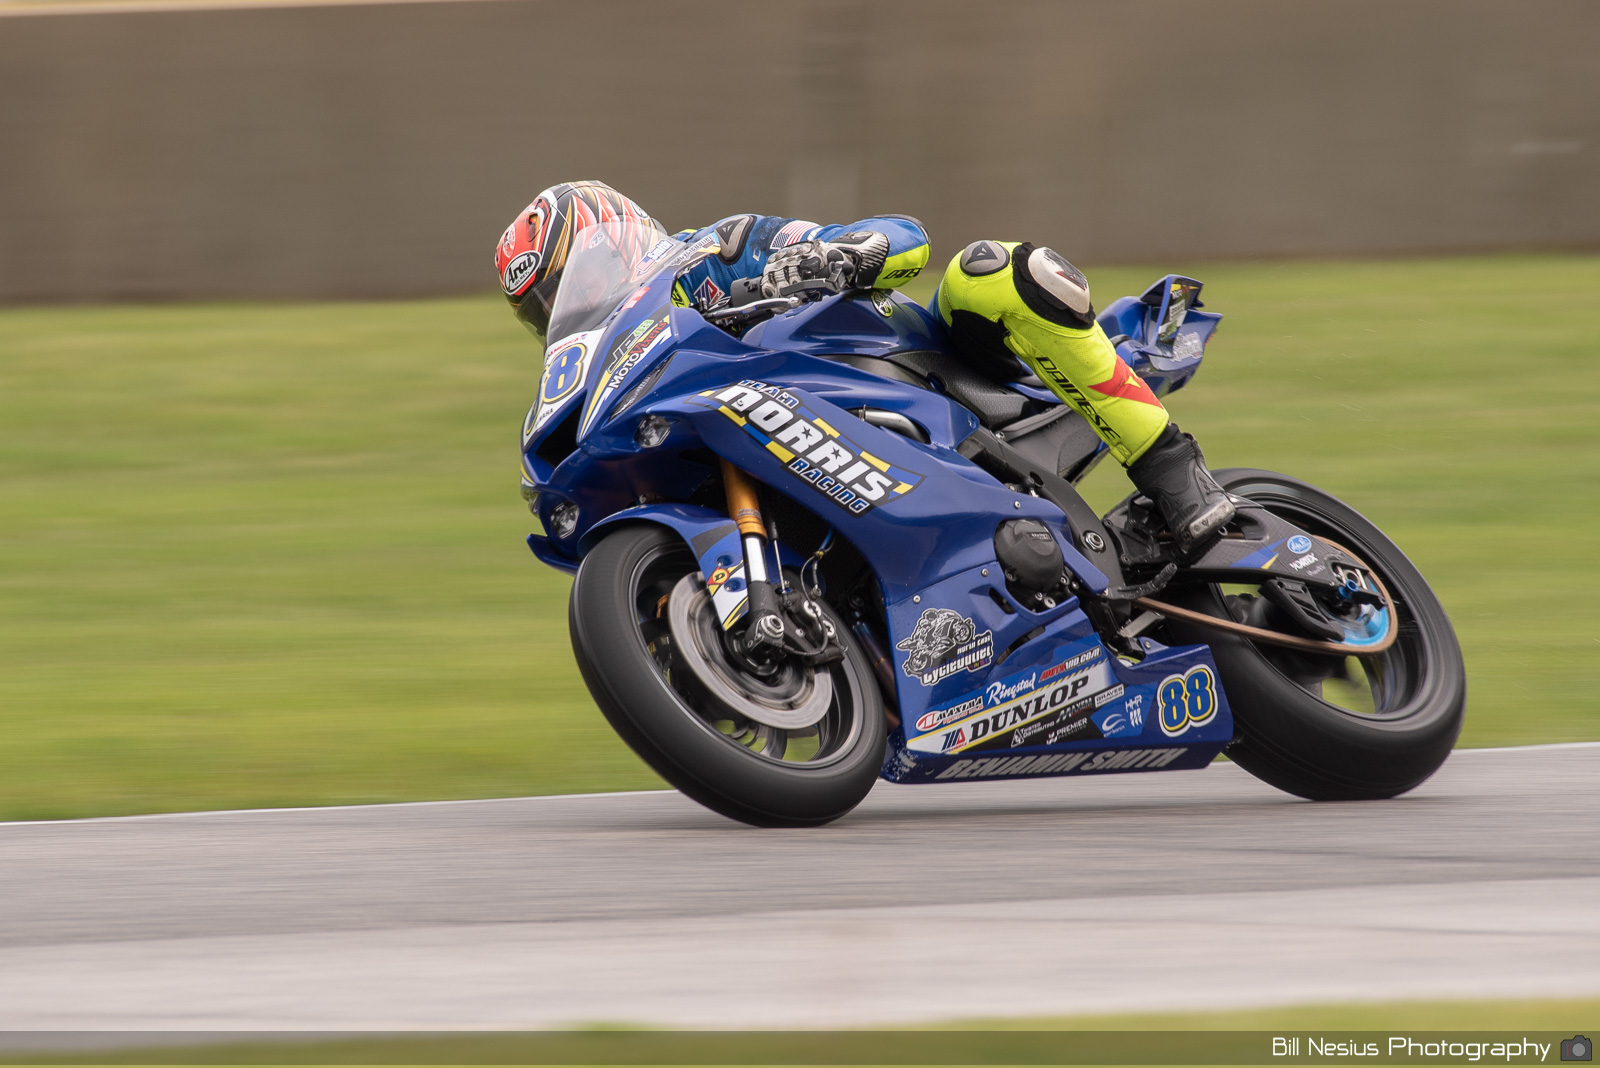 Benjamin Smith on the Number 88 Team Norris Racing Yamaha YZF-R6 / DSC_9413 / 4